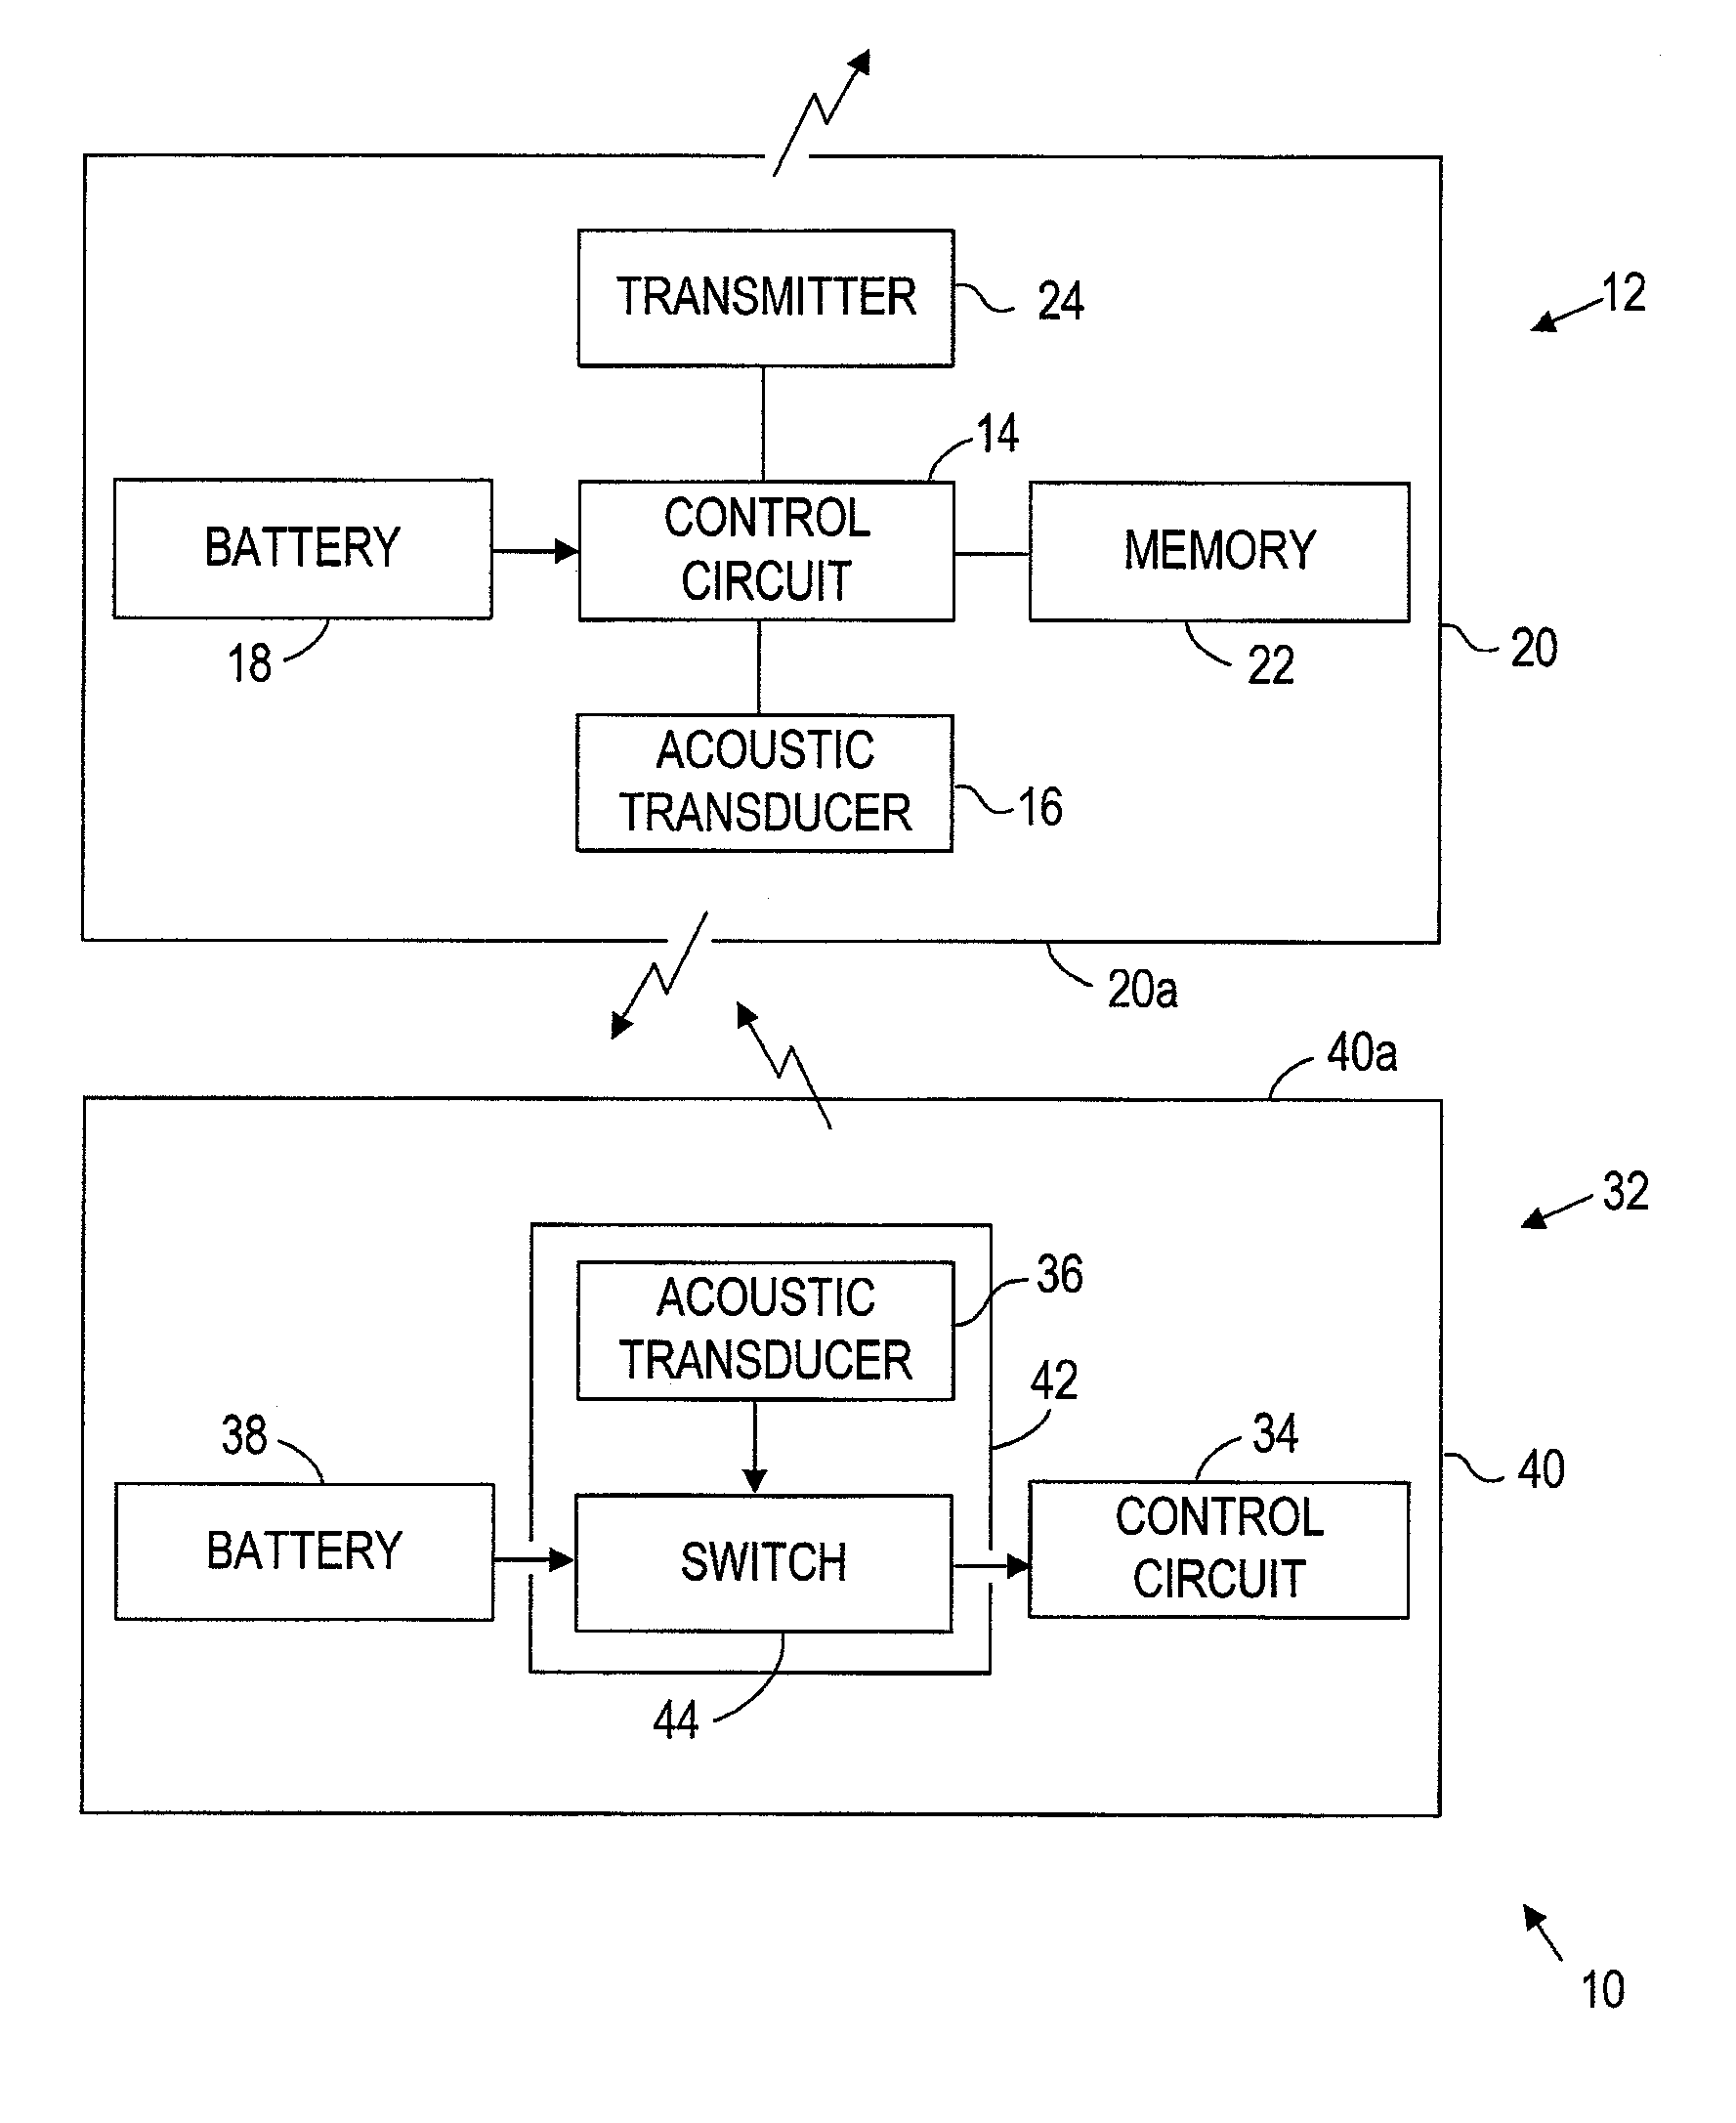 Apparatus and methods using acoustic telemetry for intrabody communications